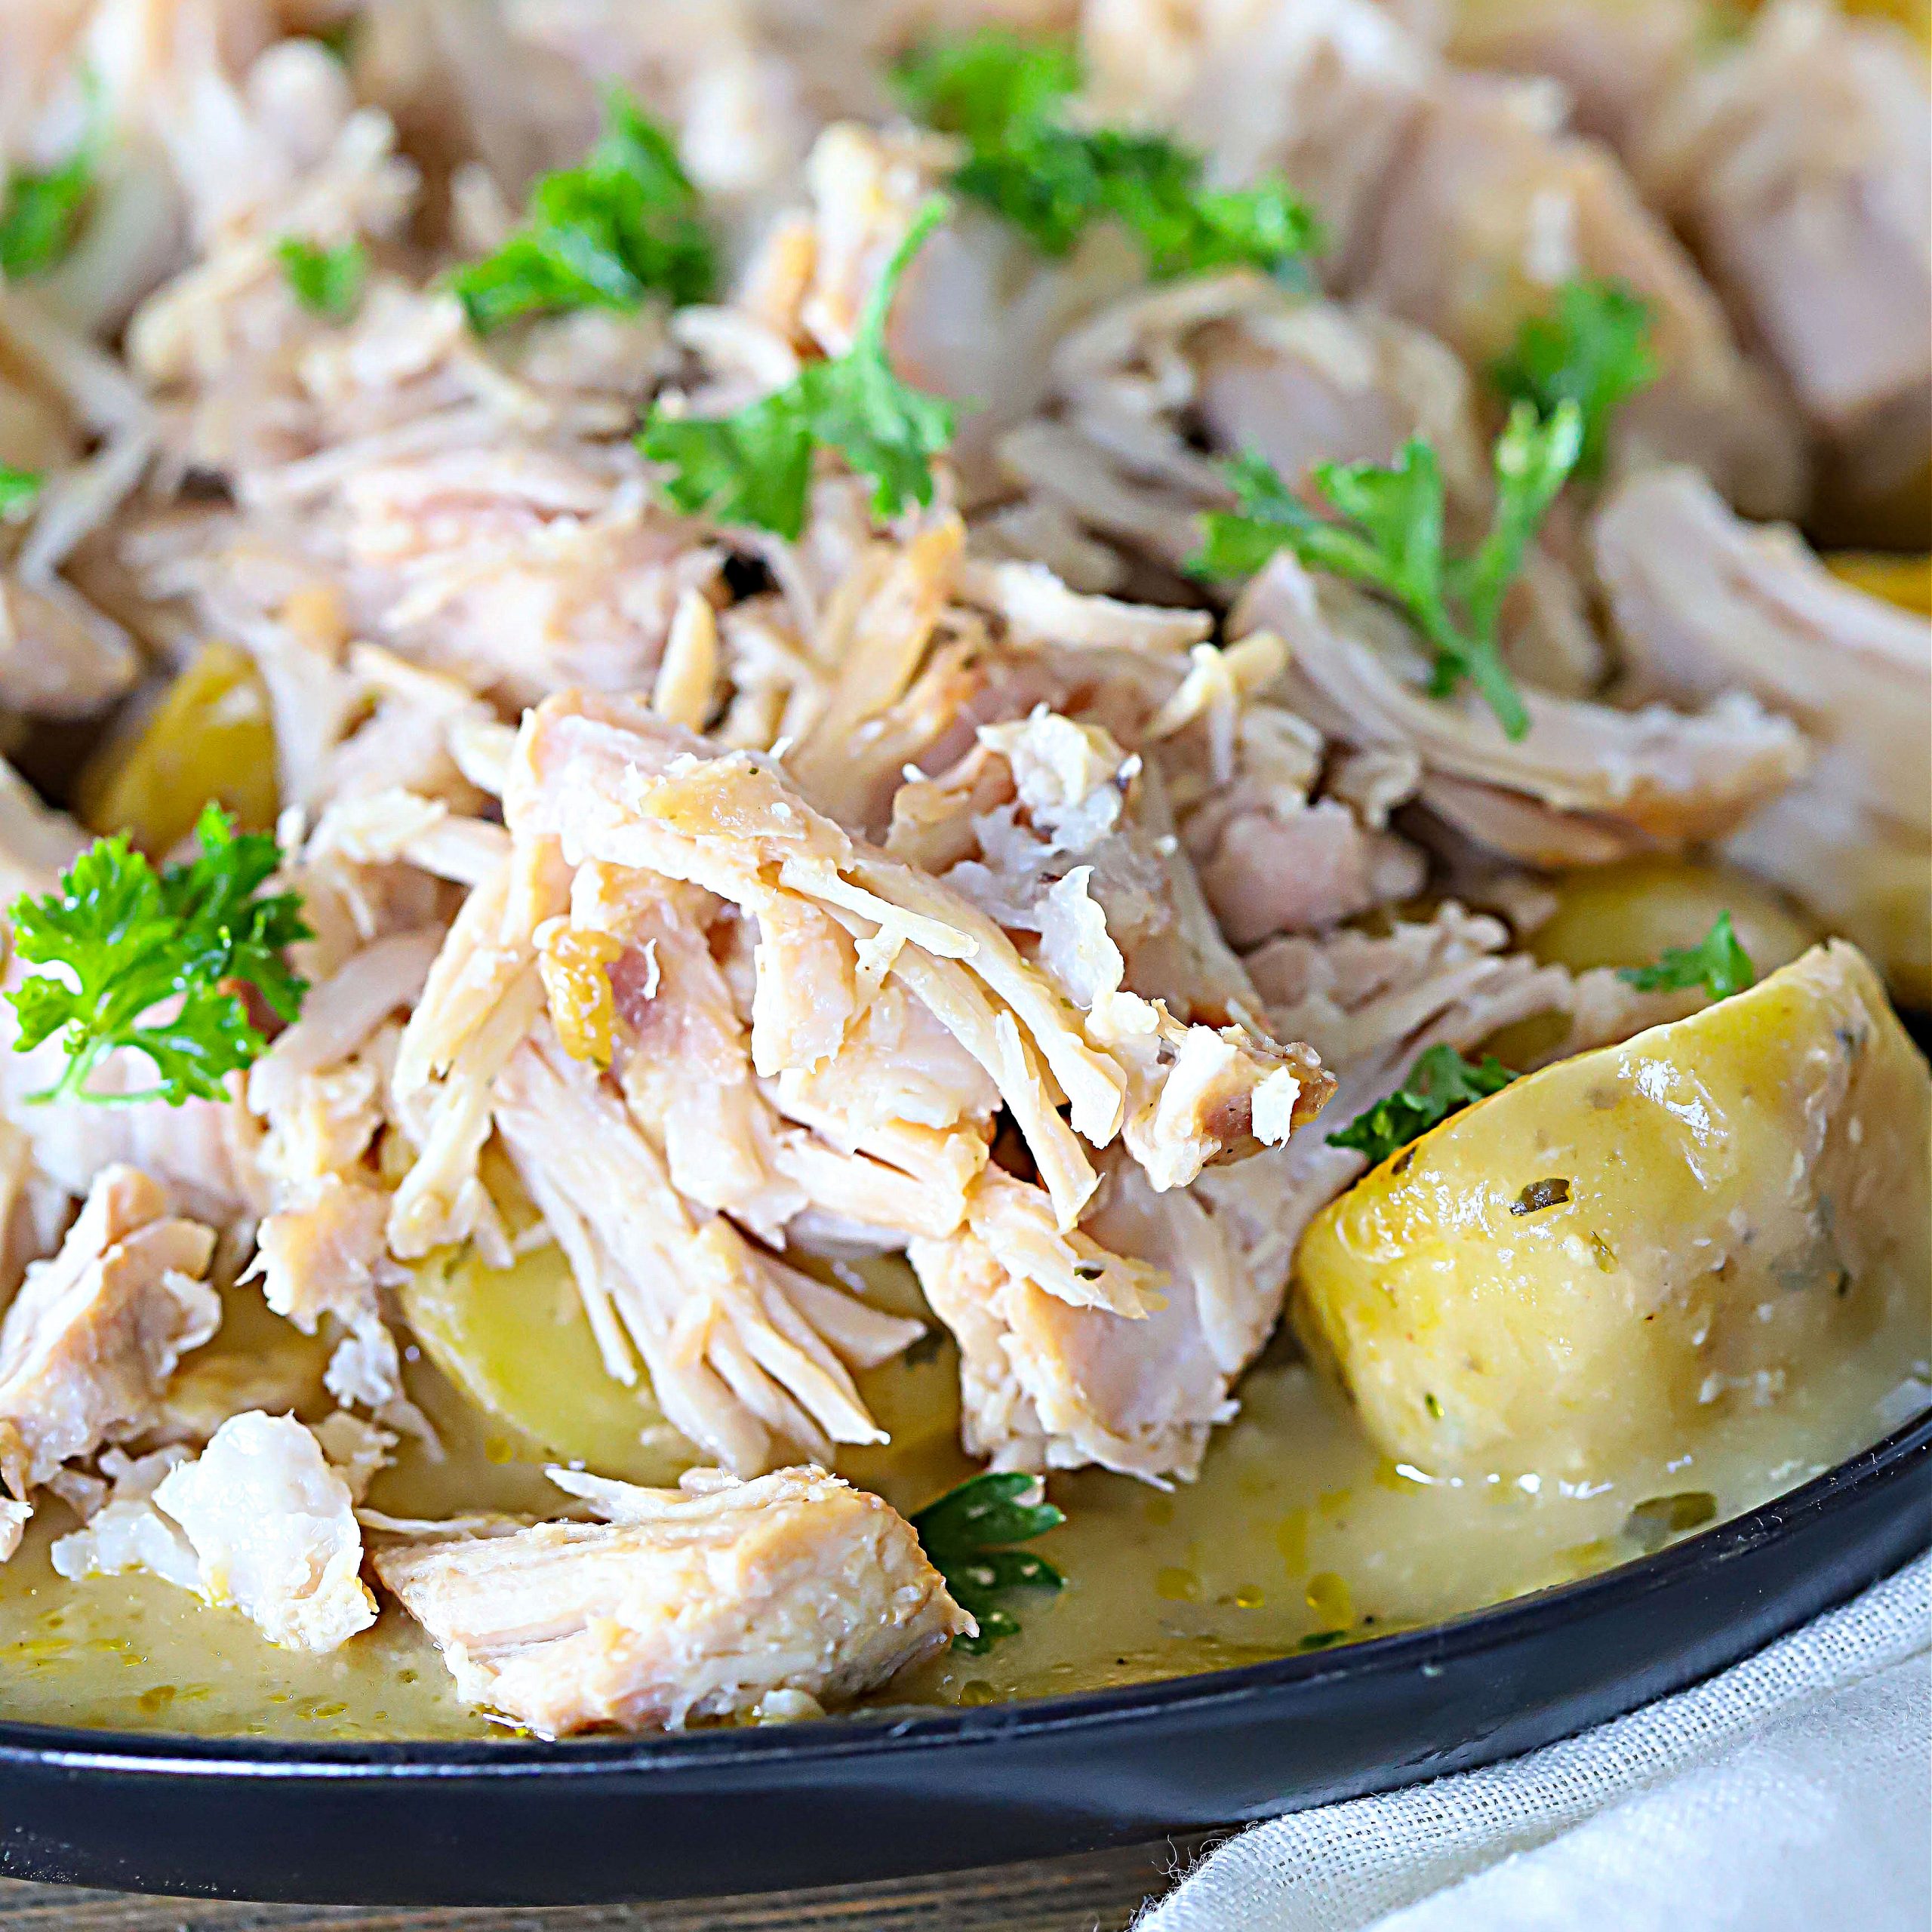 Golden potatoes topped with tender pork chops and parsley.